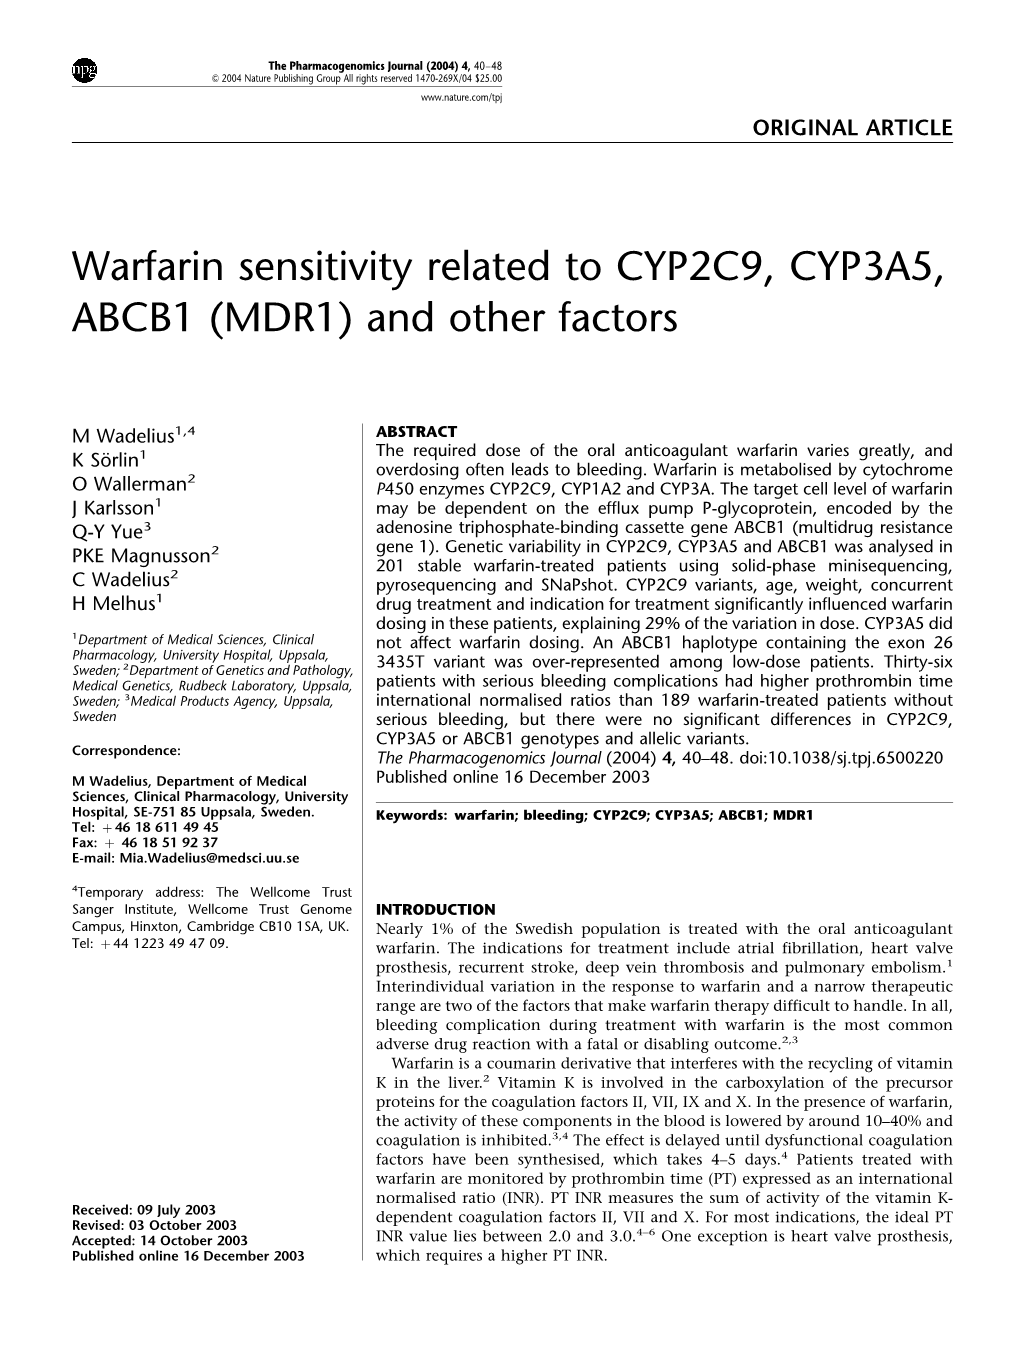 Warfarin Sensitivity Related to CYP2C9, CYP3A5, ABCB1 (MDR1) and Other Factors